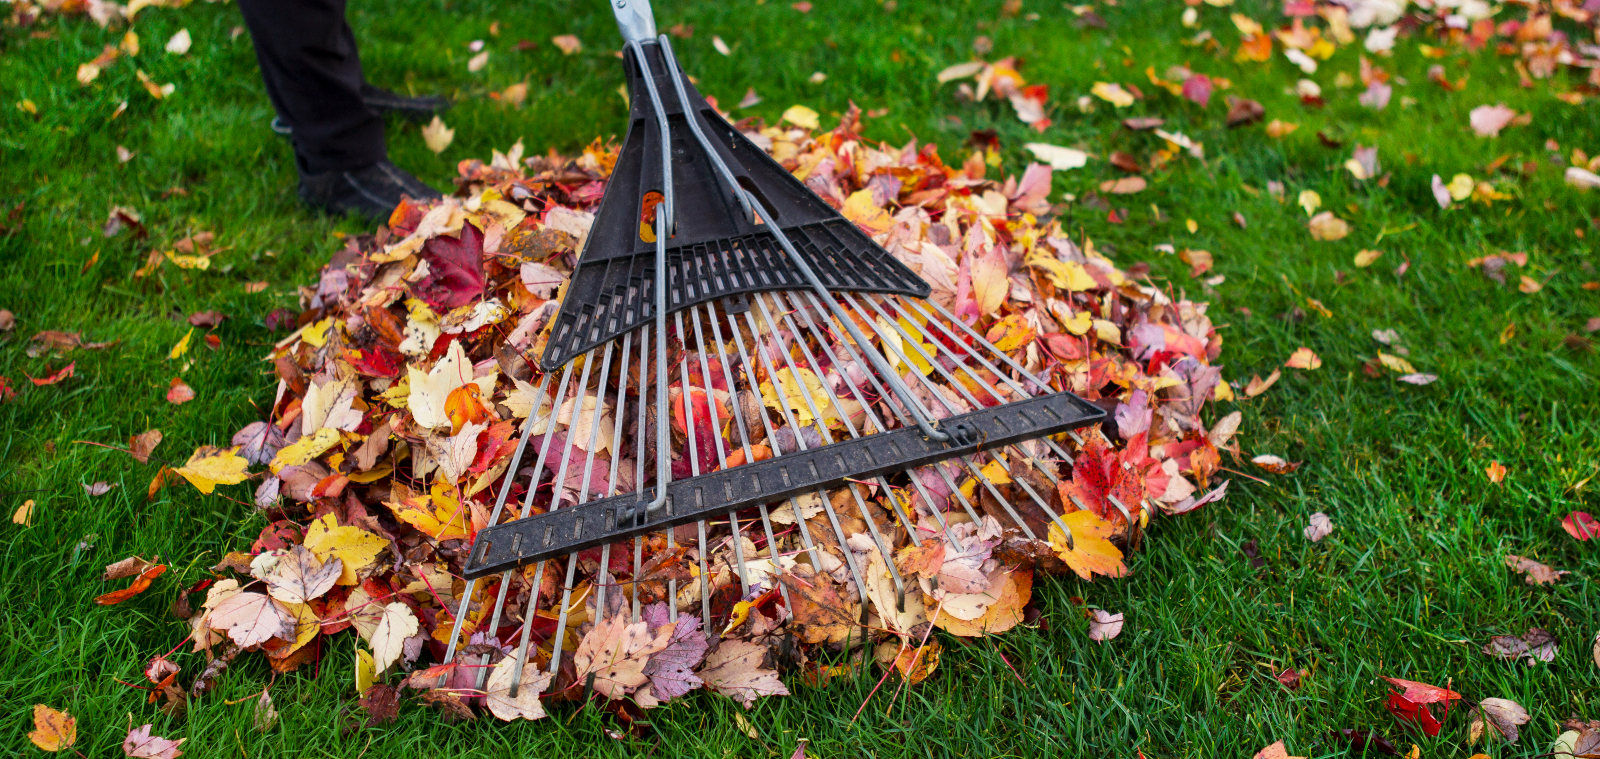 Someone raking up leaves into a pile to illustrate Should Leaves Be Raked?